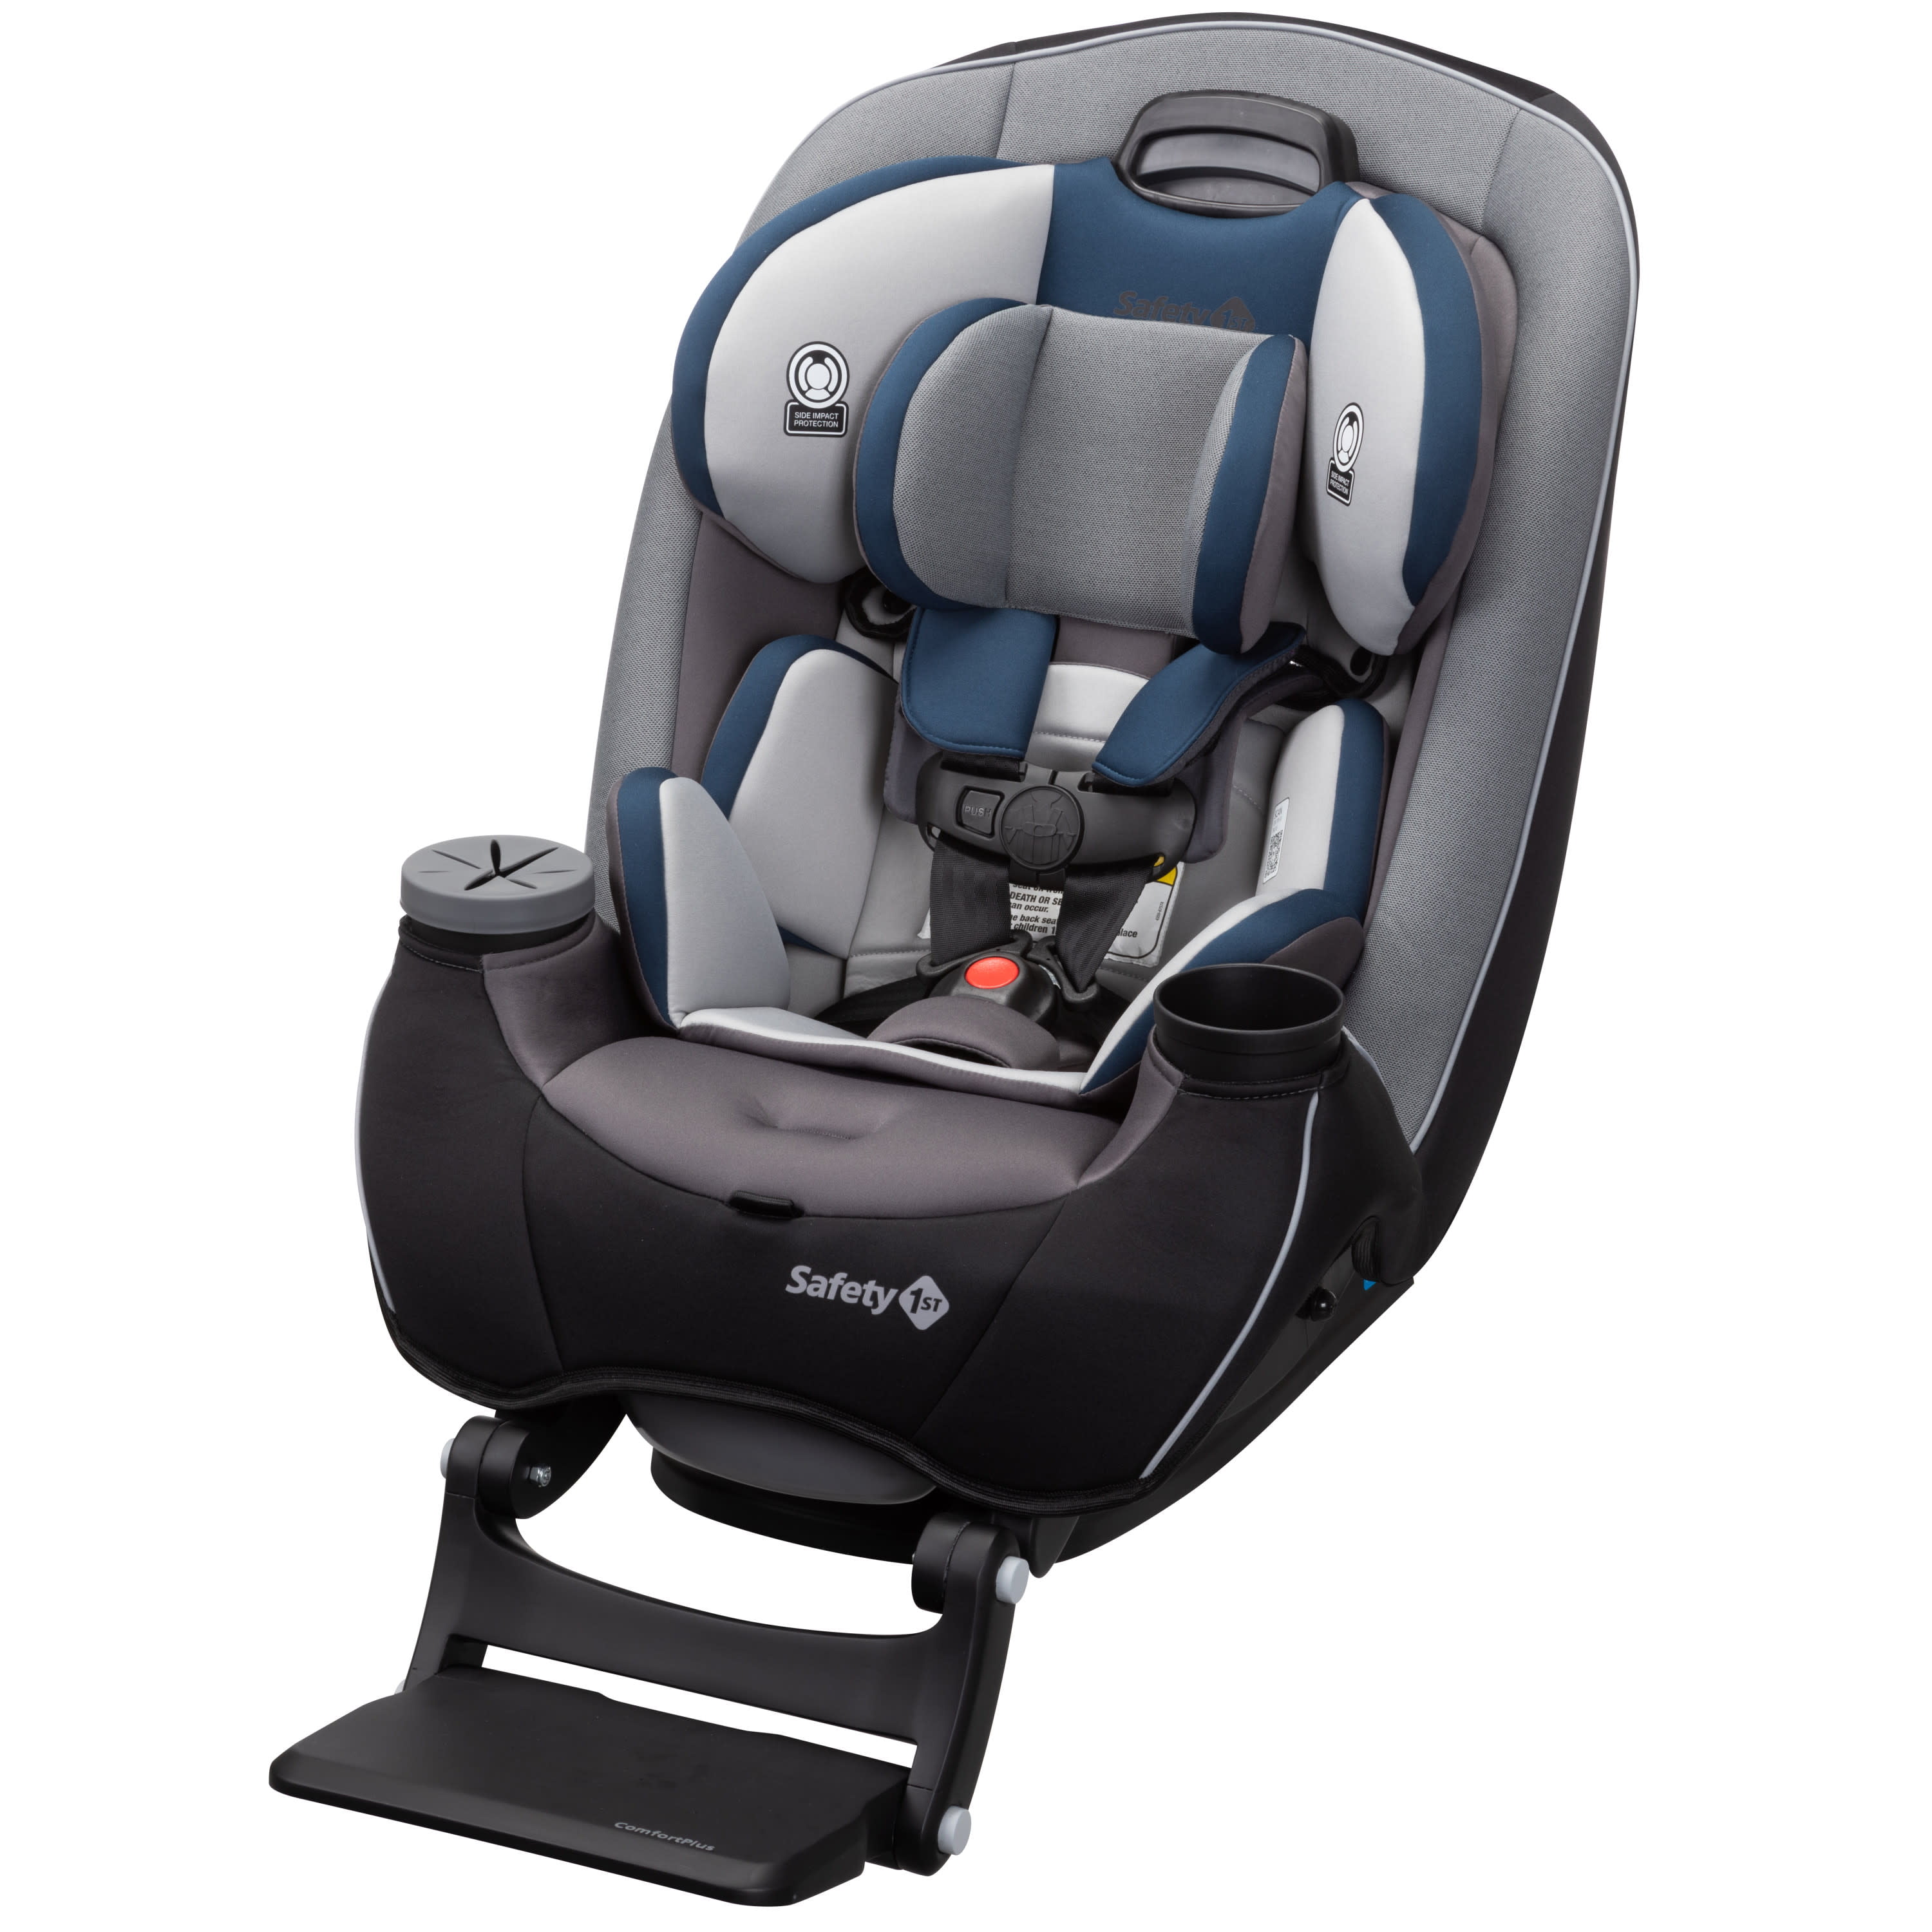 Safety 1ˢᵗ Grow and Go Extend 'n Ride Convertible Car Seat, Periwinkle -  Walmart.com